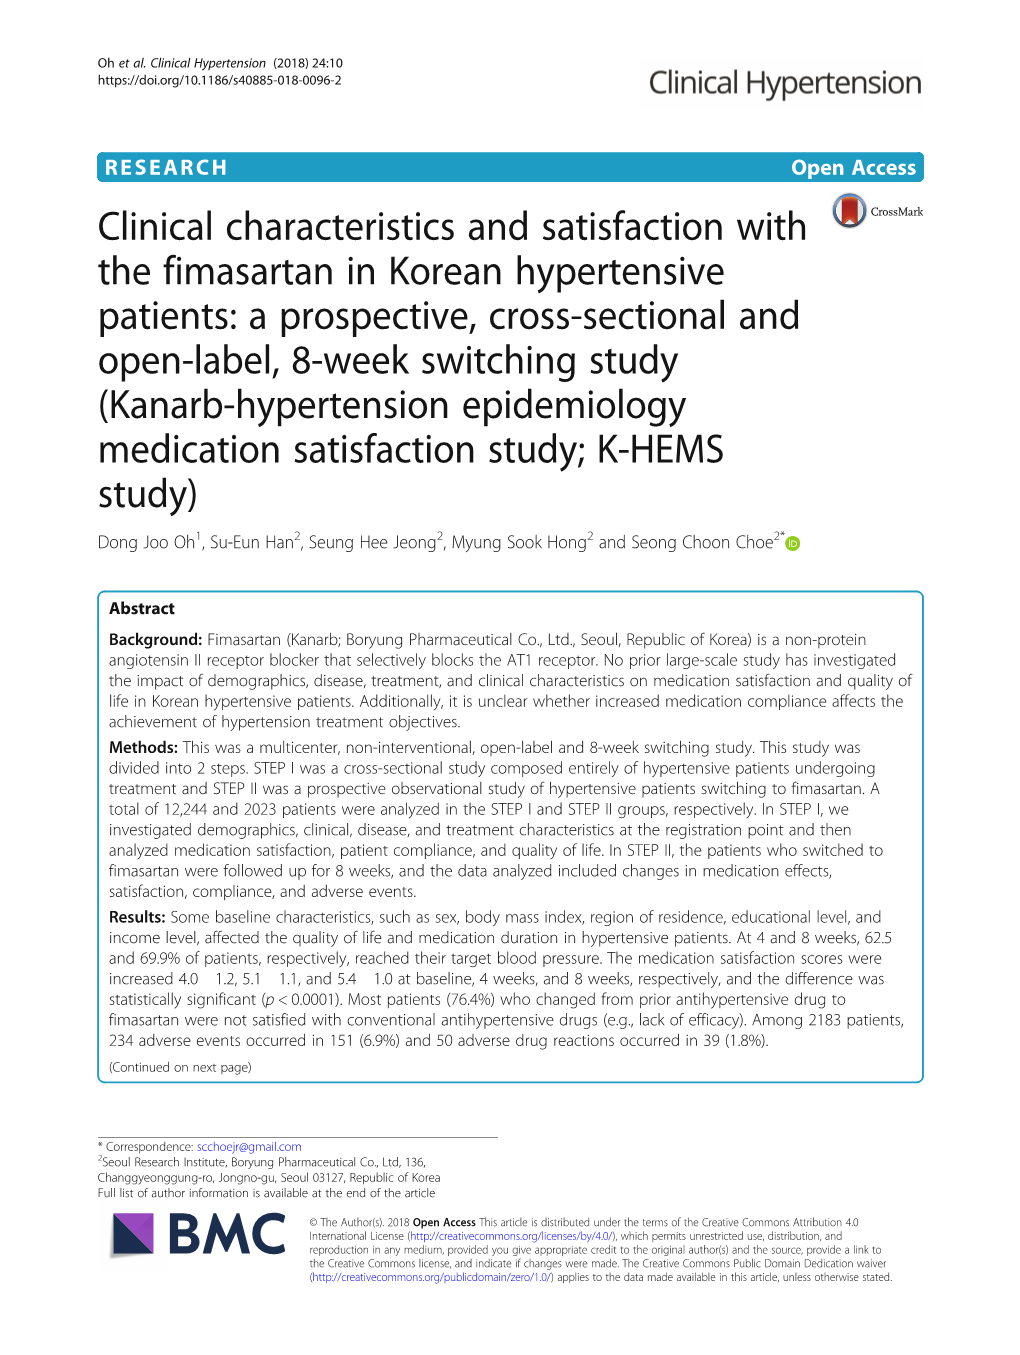 Clinical Characteristics and Satisfaction